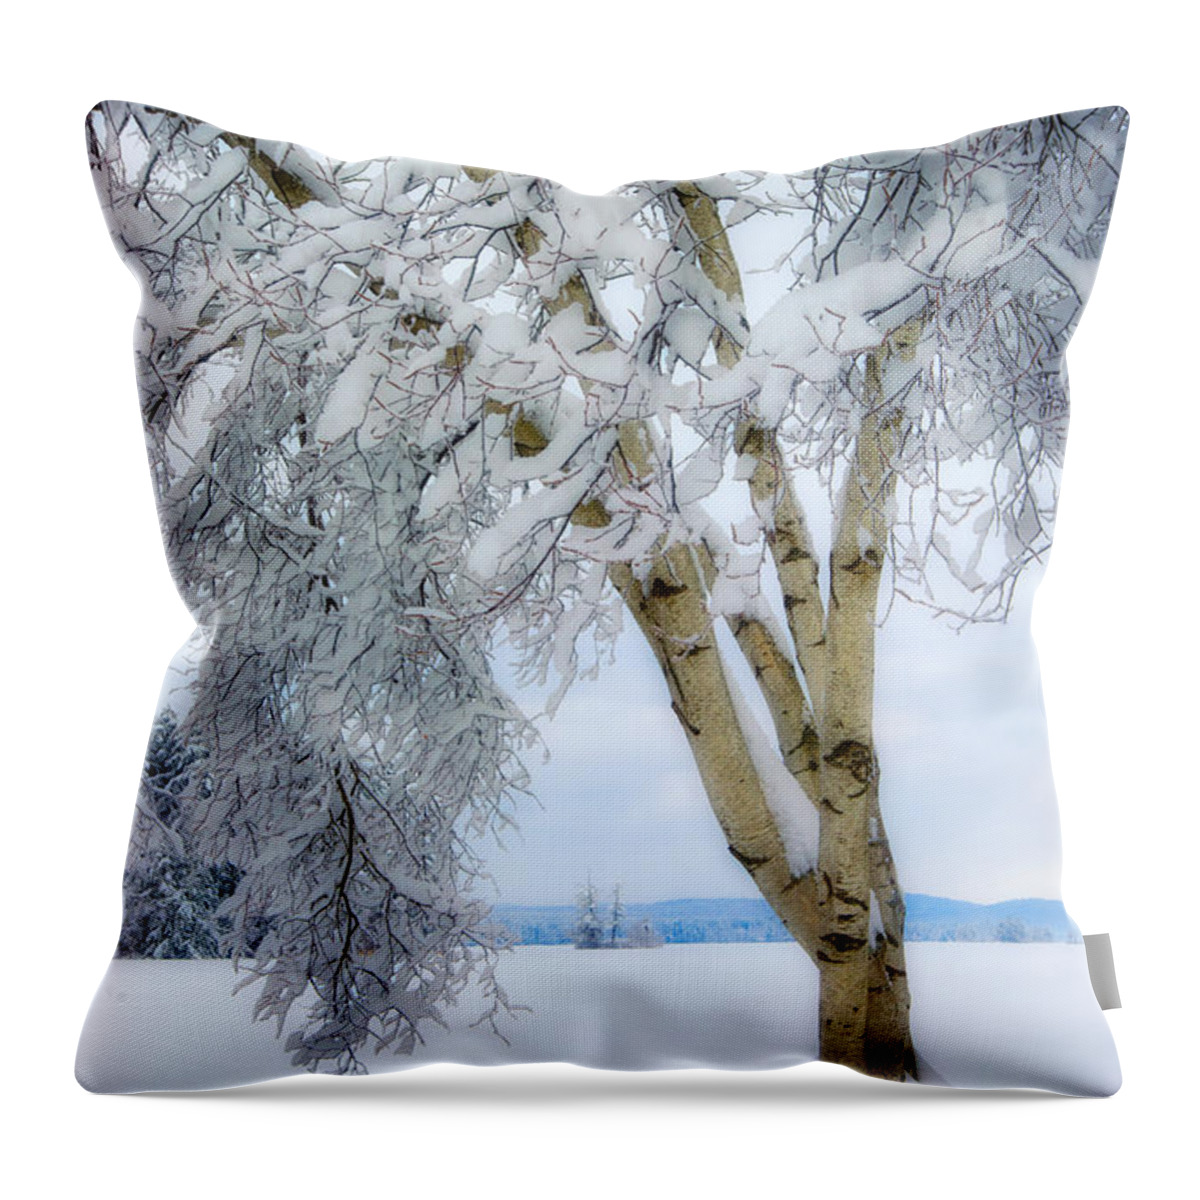 Winter Throw Pillow featuring the photograph Winter's Dream by Darylann Leonard Photography